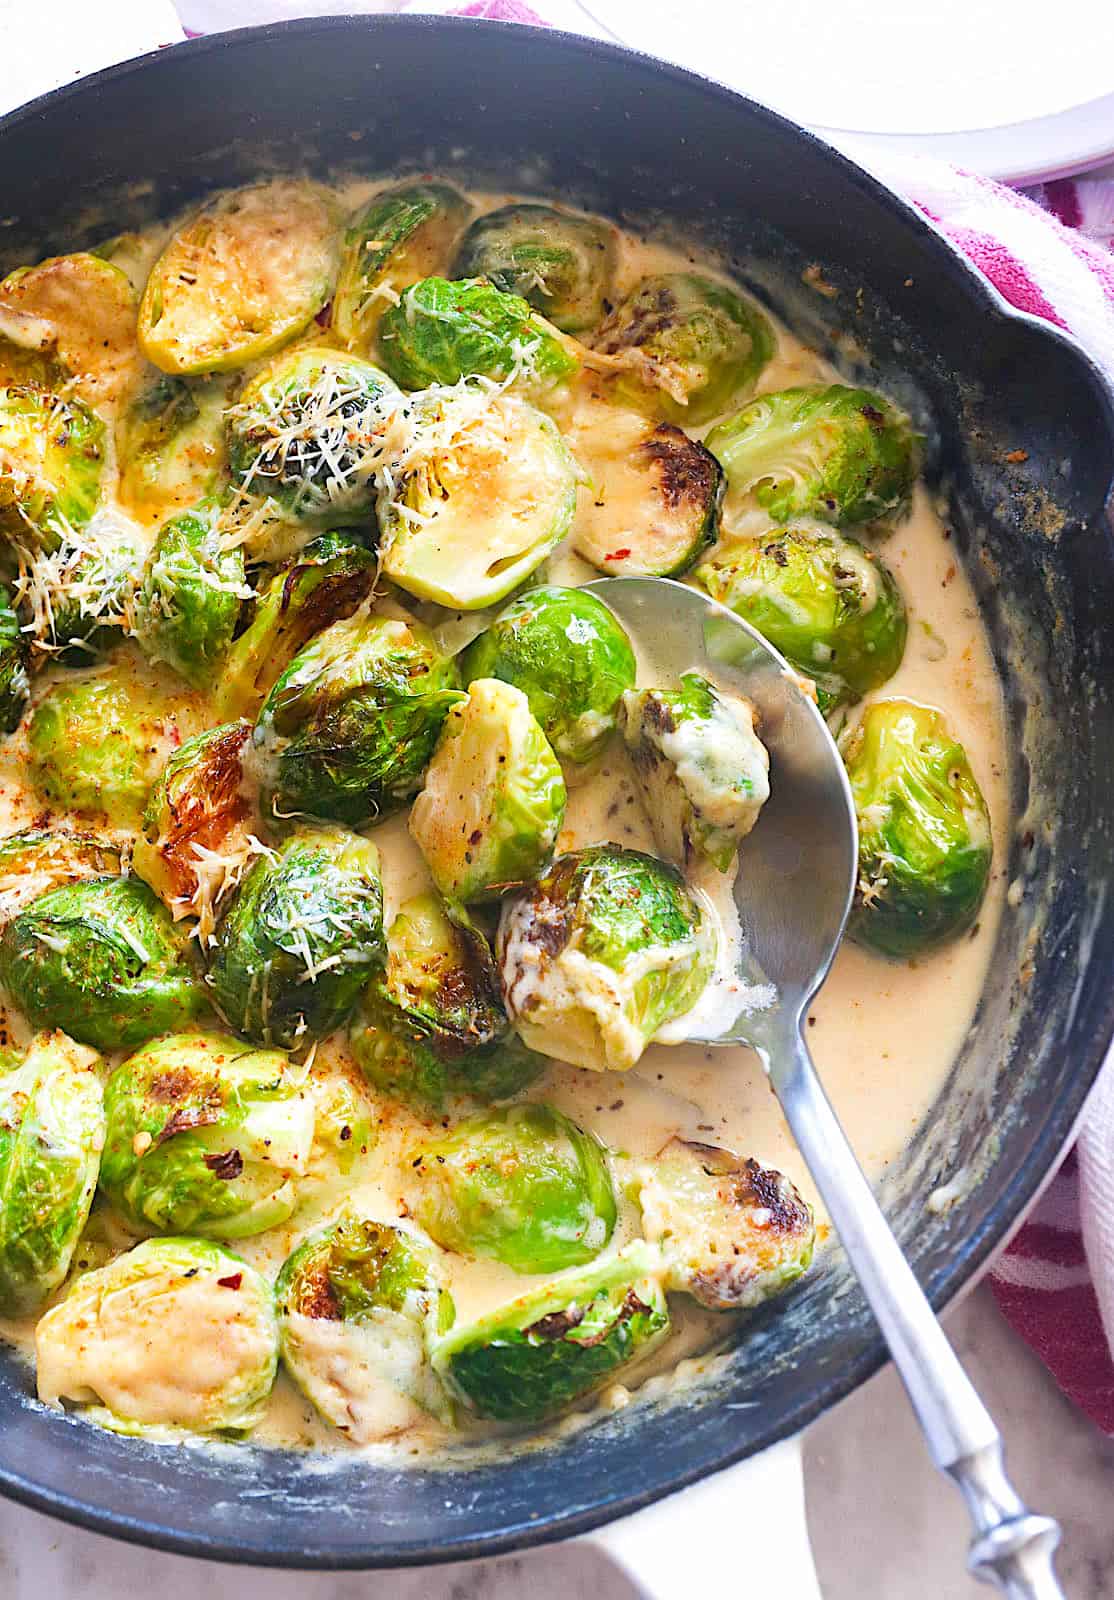 Serving up insanely good creamy Brussels sprouts